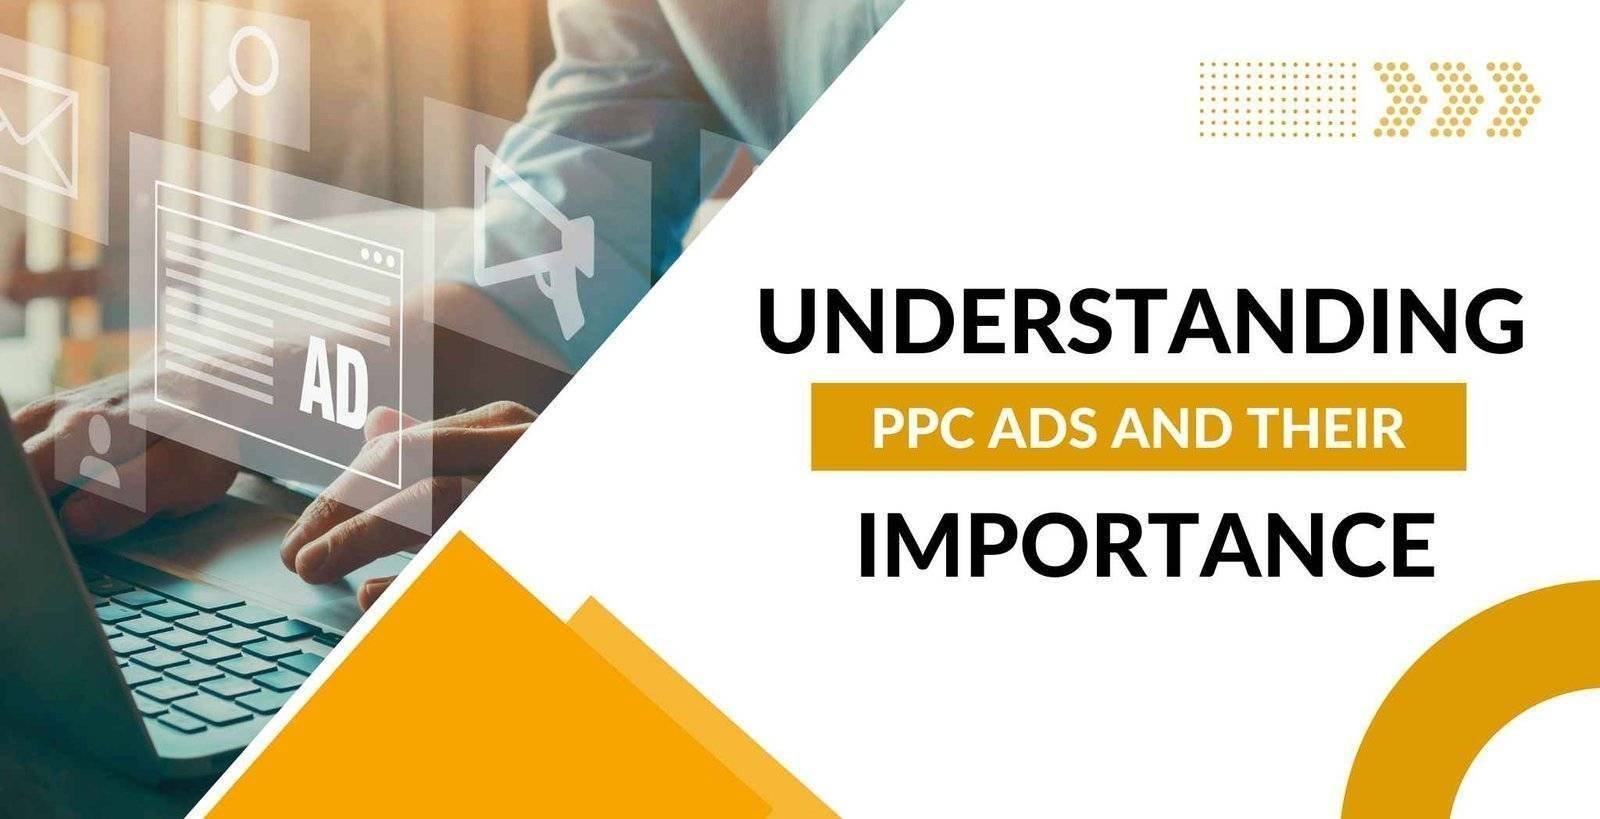 Ppc ads examples, Ppc ads strategy, pay-per click sites, ppc marketing, ppc google ads, what is a ppc economics, ppc in digital marketing,